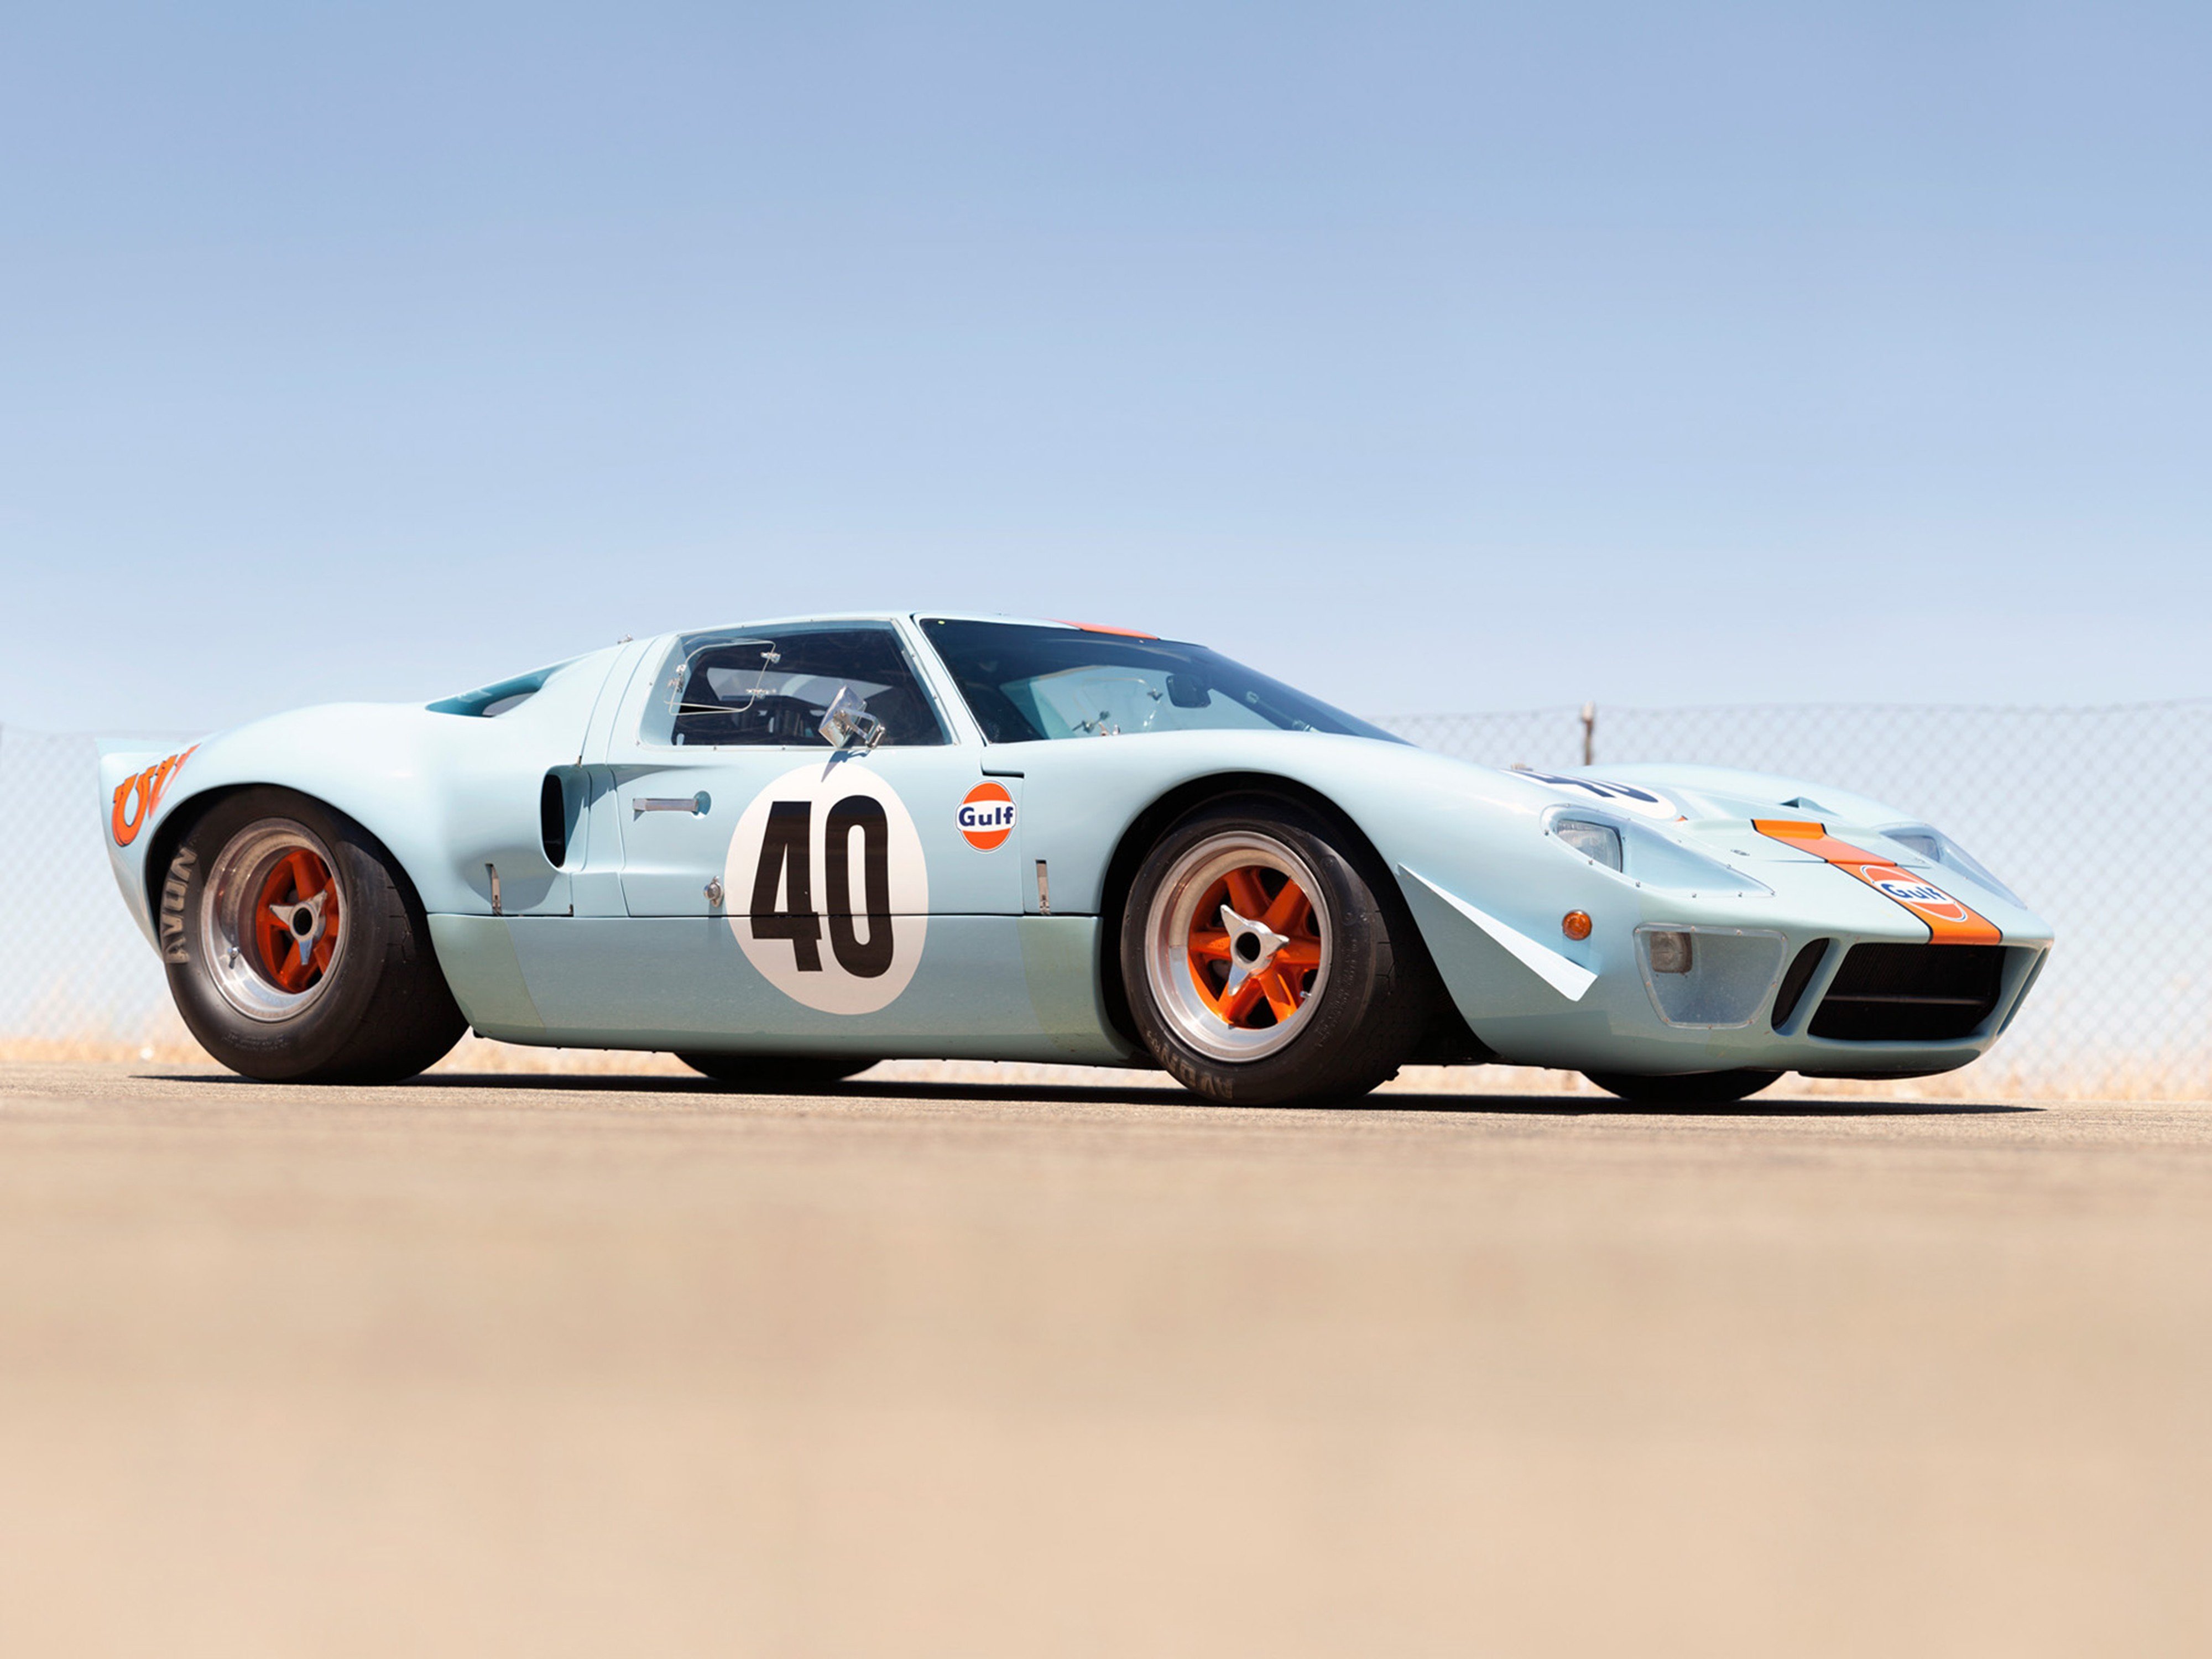 1968, Gulf, Ford, Gt40, Le mans, Racing, Car, Race, Classic, 4000x3000 Wallpaper